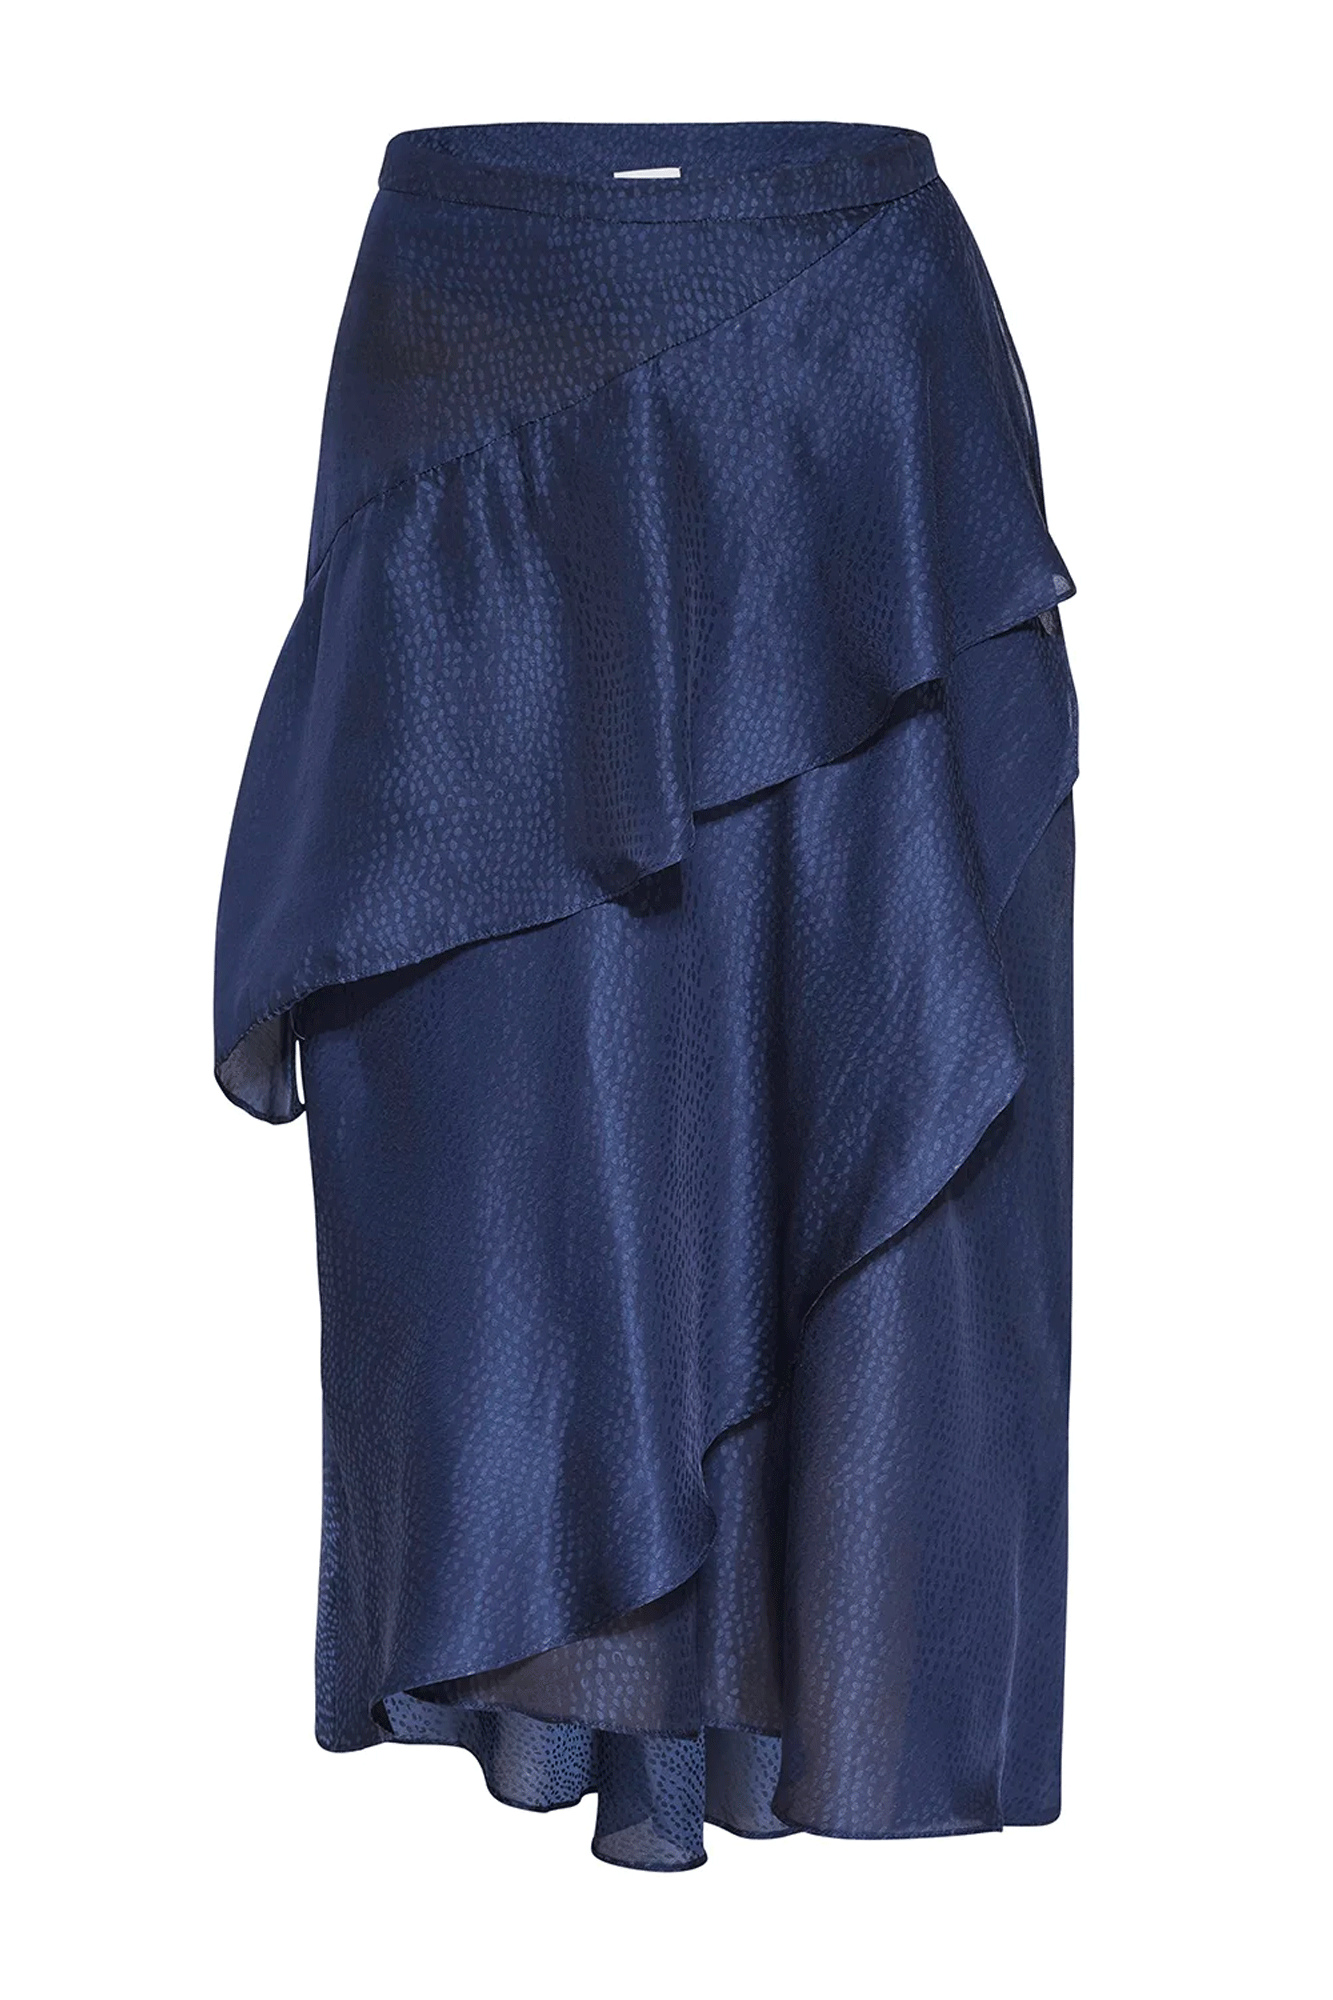 Our Odette Skirt from Misa is designed to bring effortless sophistication to any wardrobe. Crafted from chic layers of satin jacquard in a tonal cerulean dot print, the skirt features an asymmetrical ruffle trim hem for a playful touch. The hidden side zipper provides a secure fit for worry-free wear, and pairs beautifully with our coordinating Anka Top.